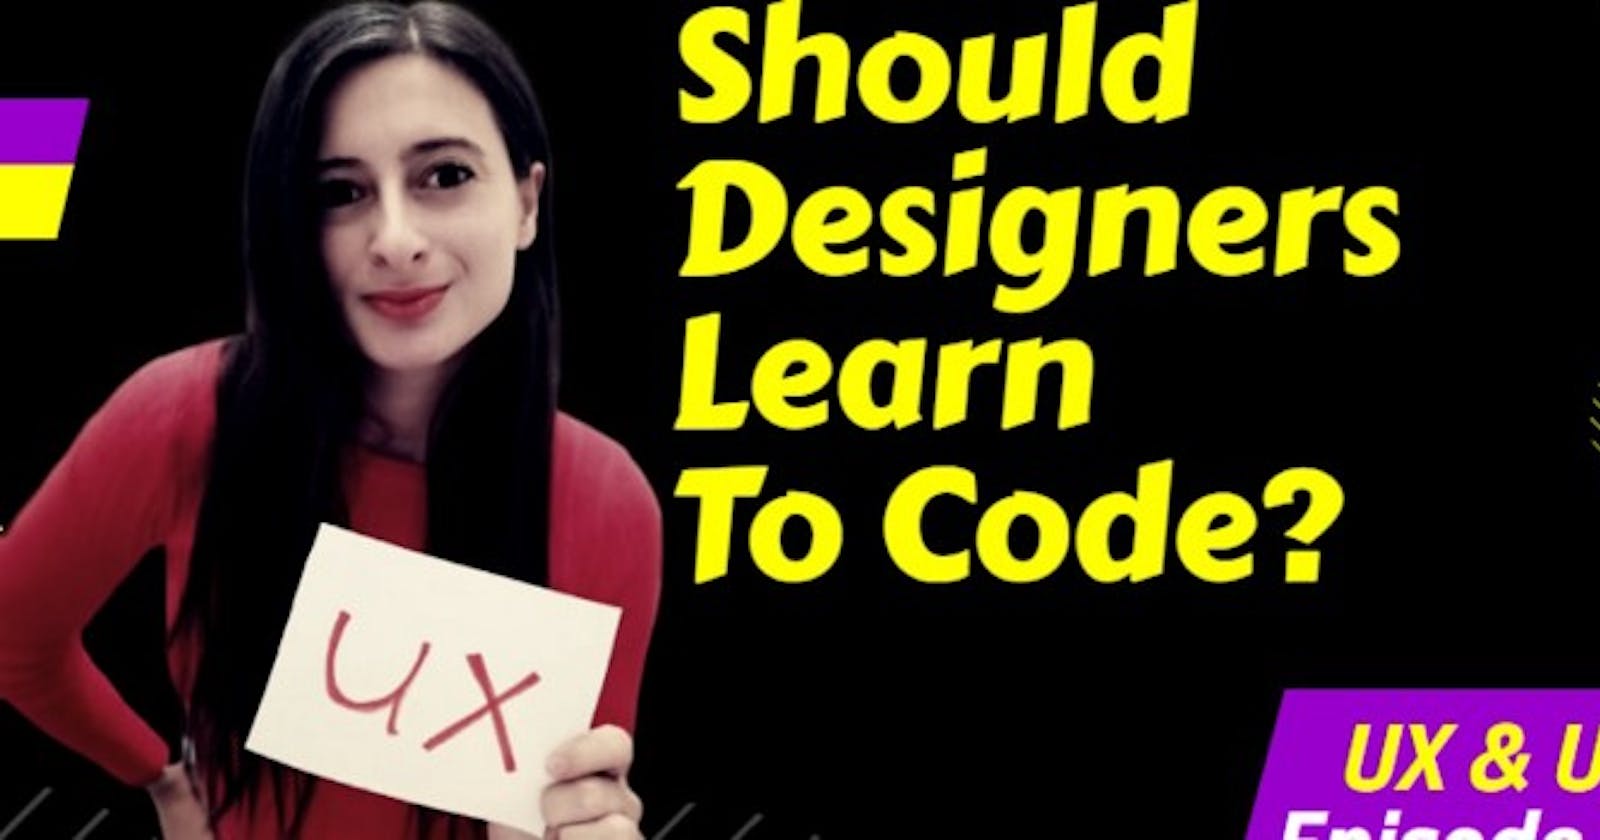 E1: “Should Designers Learn To Code?” Why It’s Not A Good Question